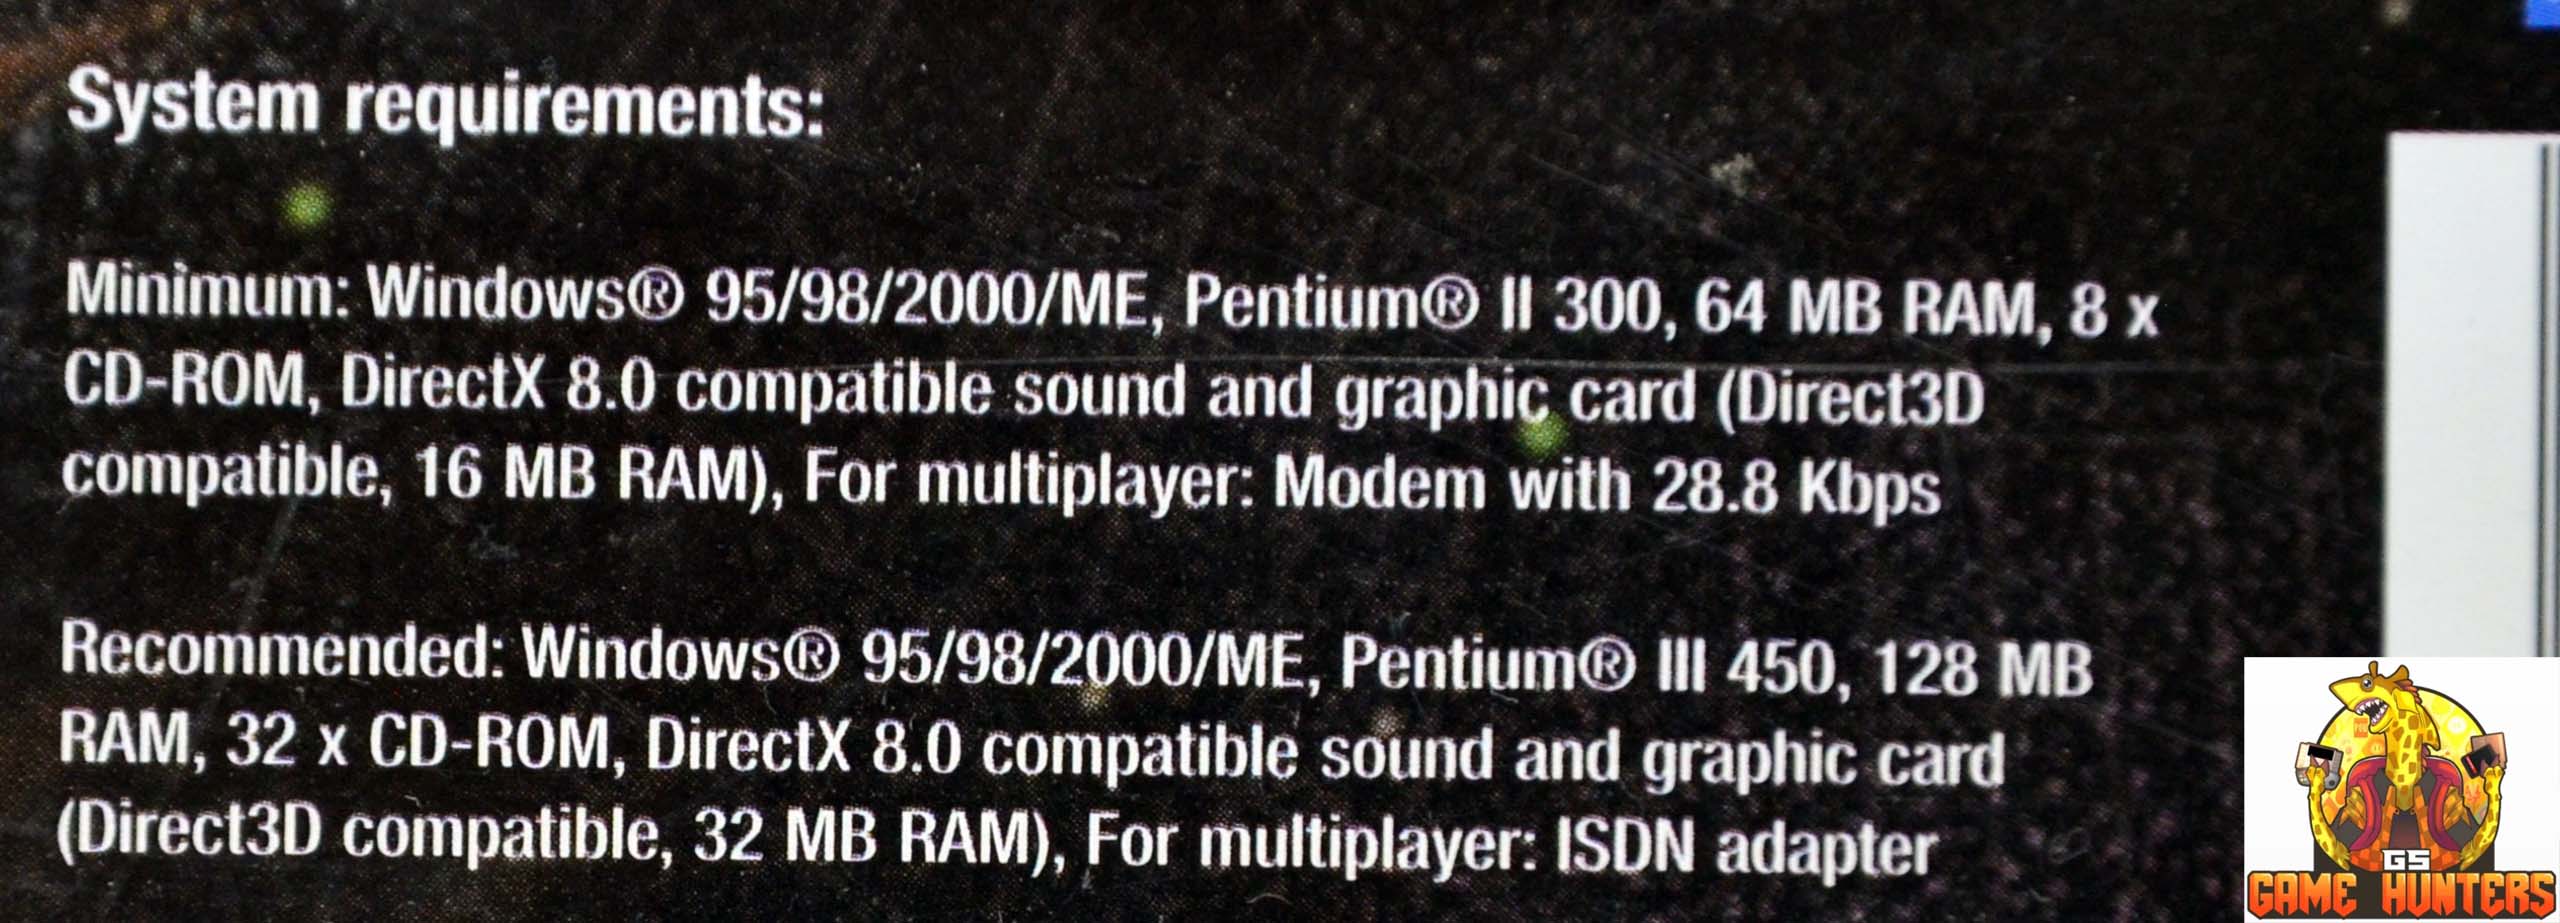 Rim System Requirements.jpg  by GSGAMEHUNTERS